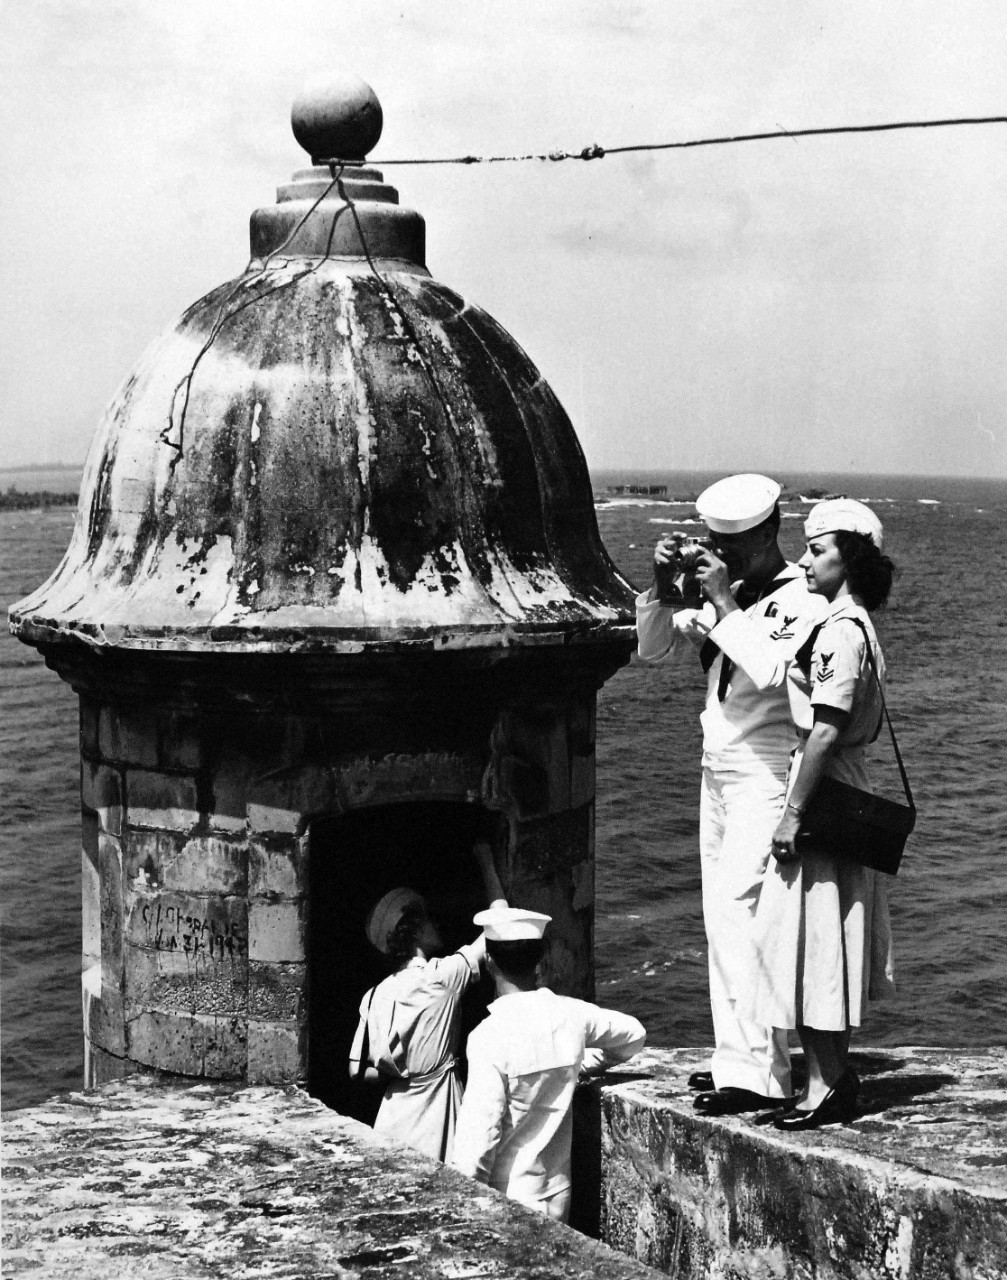 USN 709020:   WAVES and friends on Liberty, October 1953.   One of El Morro’s ancient lookout towers is inspected by HM3 Marie Myers; YN2 Harold Baker , while HM2 Joseph La Freniere and HM2 Eileen Paluzzi take pictures of the fort.   Photograph released October 26, 1953.   Master Caption:   Navy Accepts Women Volunteers for Duty on the High Seas.   For the first time in history, the U.S. Navy has accepted volunteers for duty on the high seas from women in the enlisted WAVES.  Those eligible were WAVES of the Hospital Corps to fill sixty-three billets on ships of the Military Sea Transportation Service.   Official U.S. Navy photograph, now in the collections of the National Archives.   